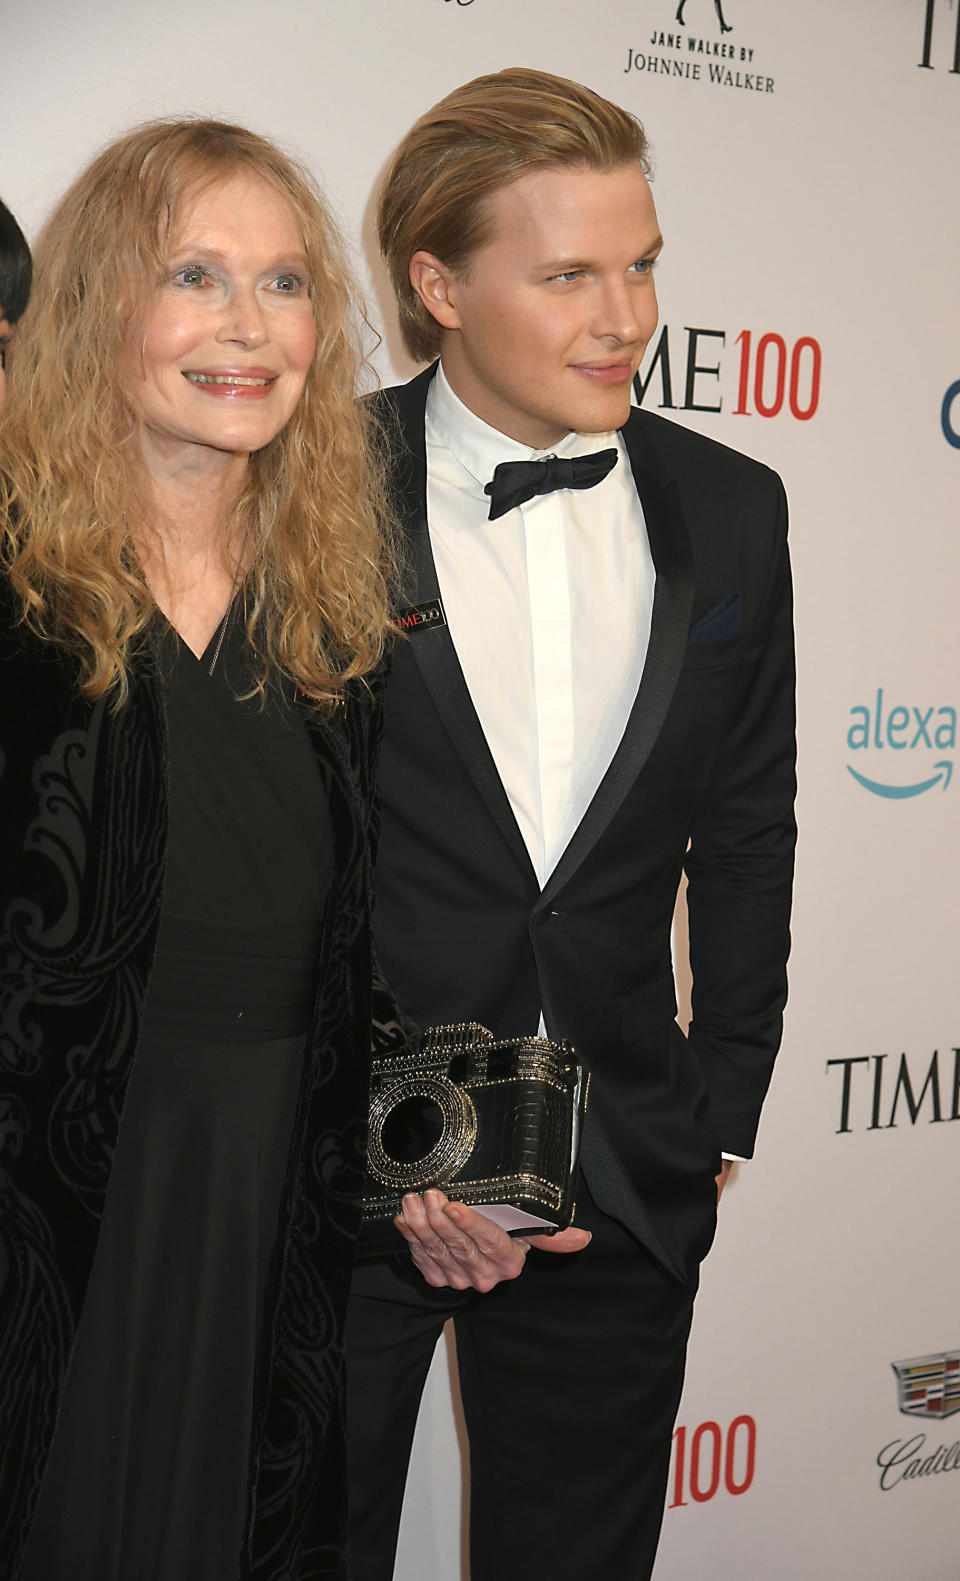  Mia Farrow and son Ronan Farrow attend the 2019 TIME 100 Most Influential People in the World Gala on April 23, 2019 at Frederick P Rose Hall, Lincoln Center in New York, New York, USA.
Robin Platzer/ Twin Images/ SIPA USA 